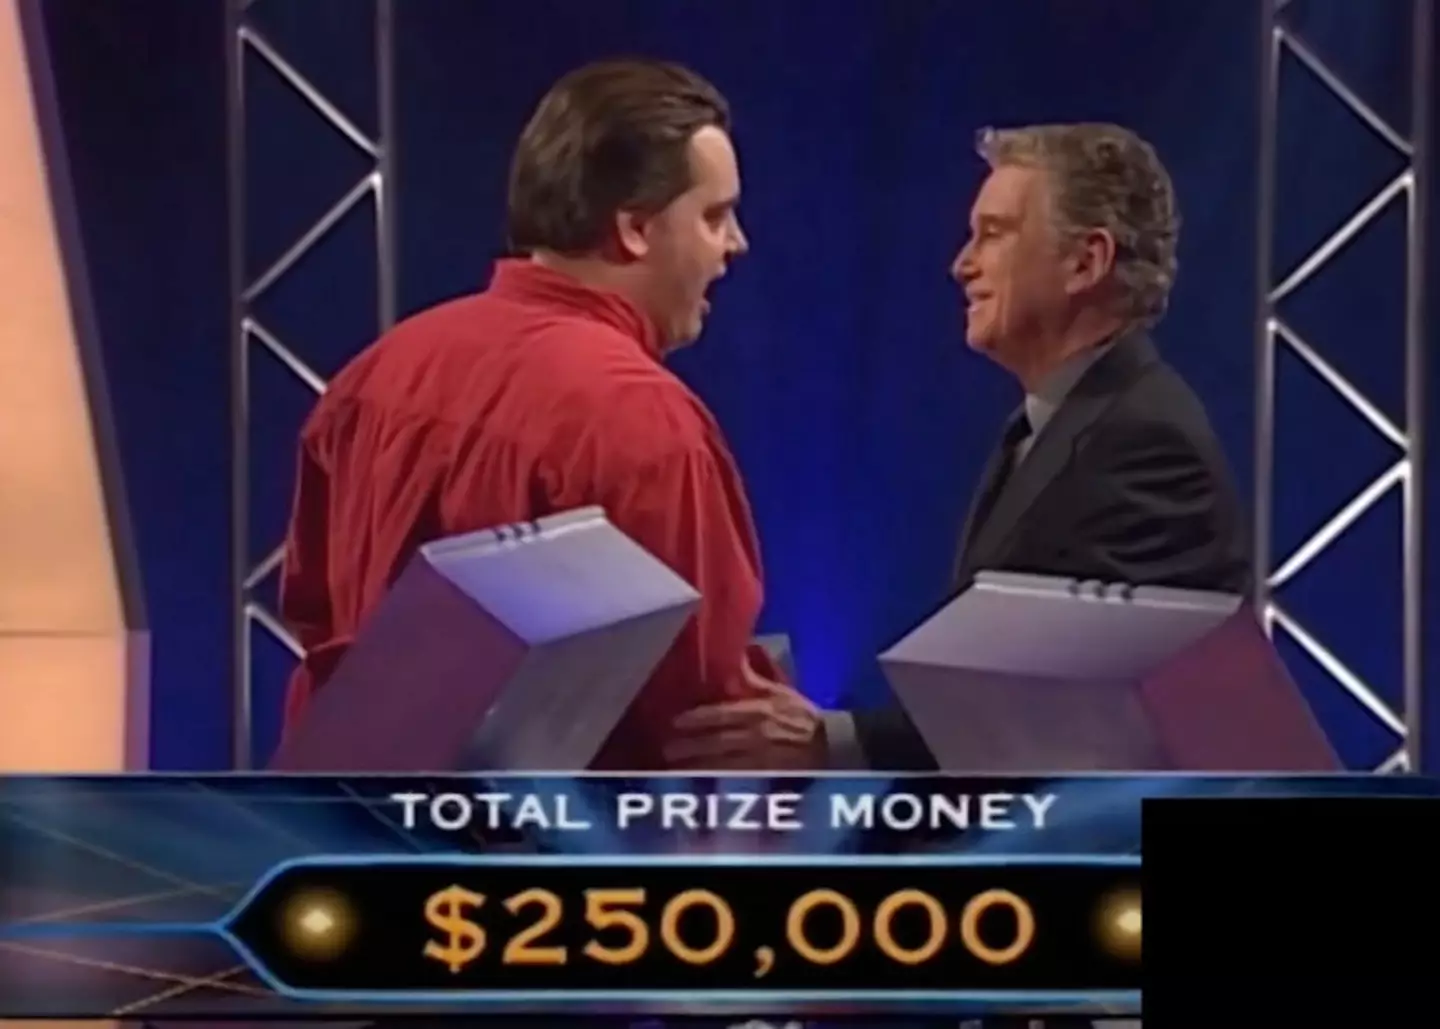 Who Wants To Be A Millionaire viewers were screaming at the television.